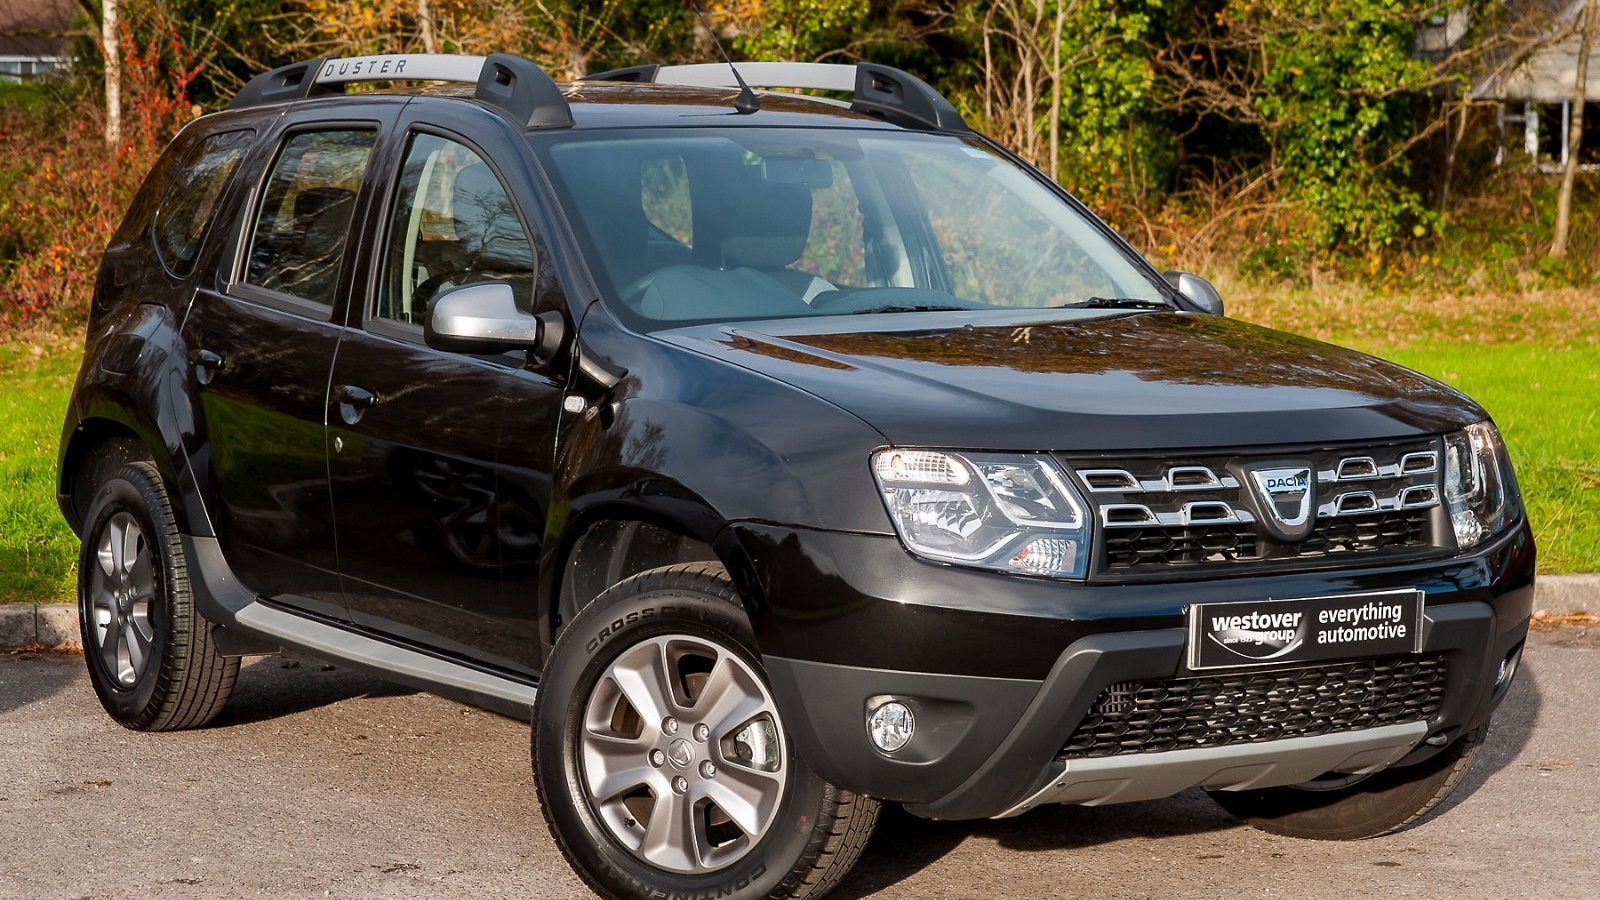 Дастер 4wd 2.0. Renault Duster 2. Renault Duster 4. Рено Дастер 2.0 4х4. Рено Дастер 2021 черный.